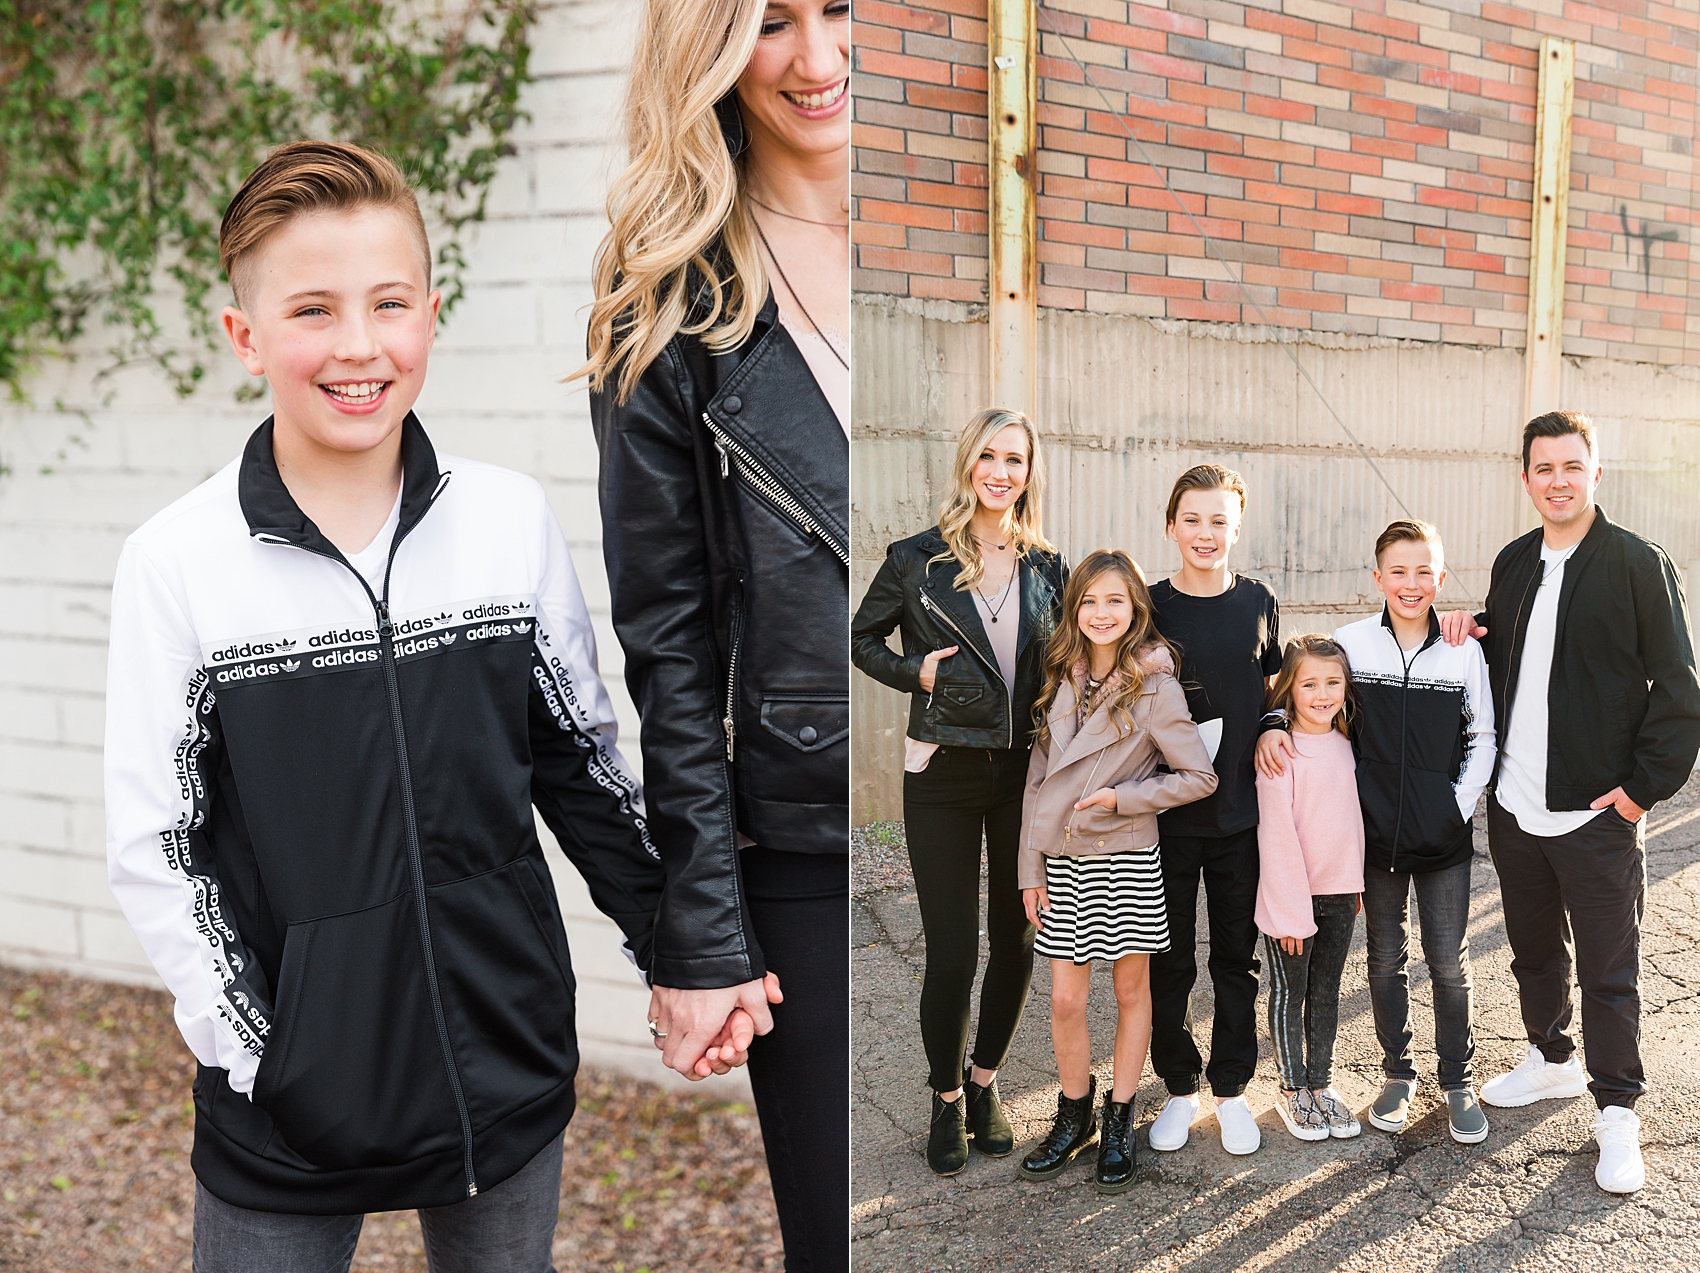 Leah Hope Photography | Scottsdale Phoenix Arizona Photographer | Downtown Phoenix | Family Pictures | Family Photos | What to Wear | Family Poses | Phoenix Police Officer | Pops of Pink